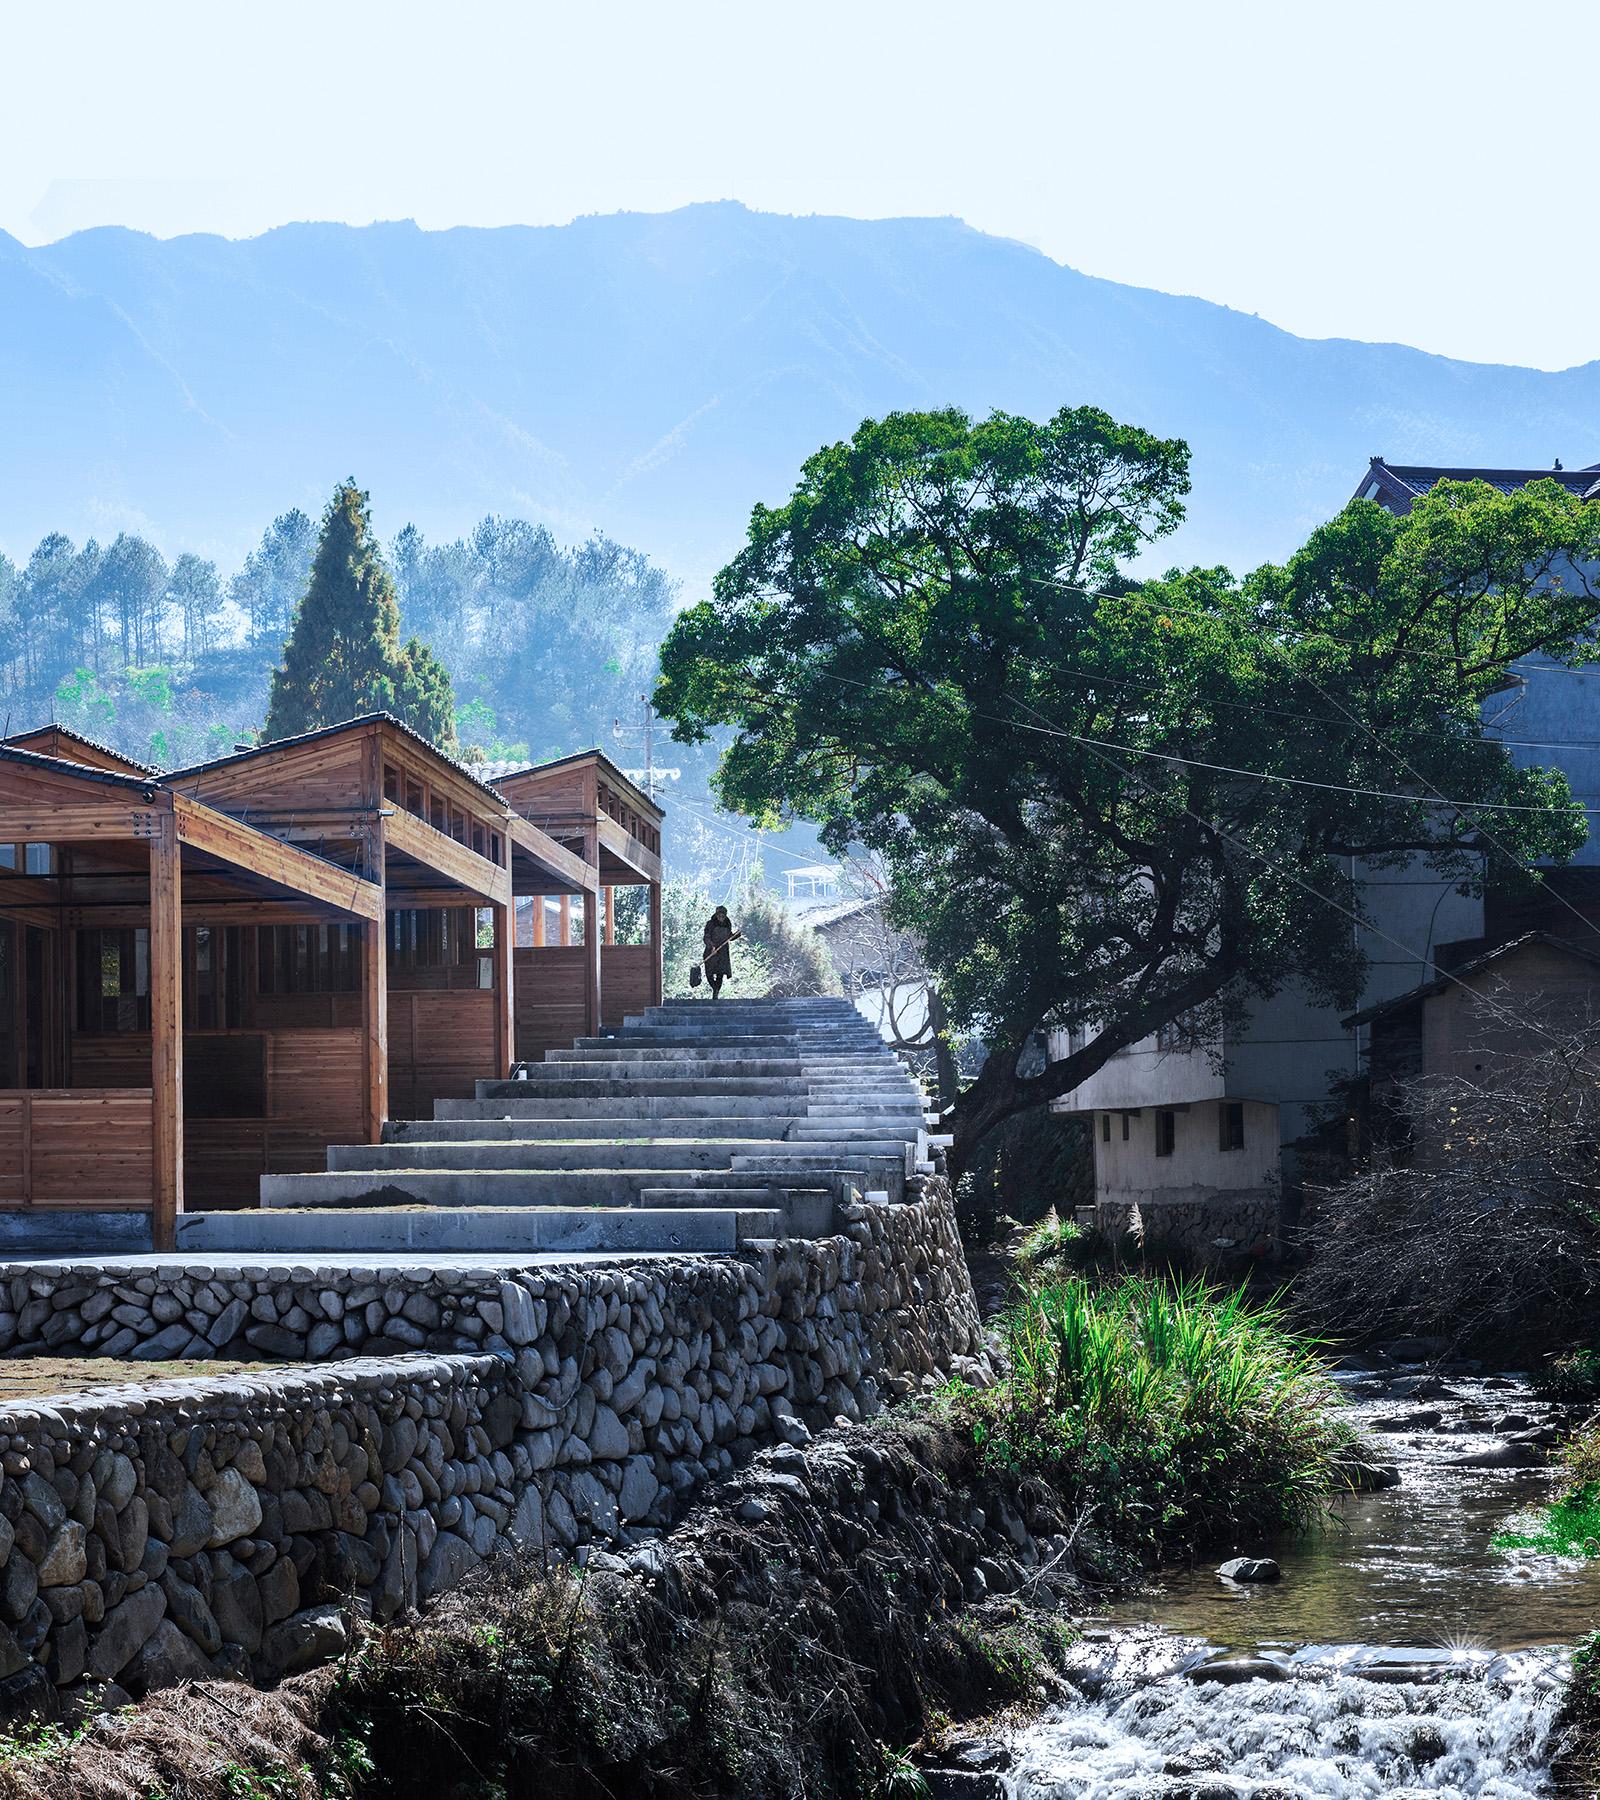 Product How to experience rural life in modern China - The Vagabond Imperative image